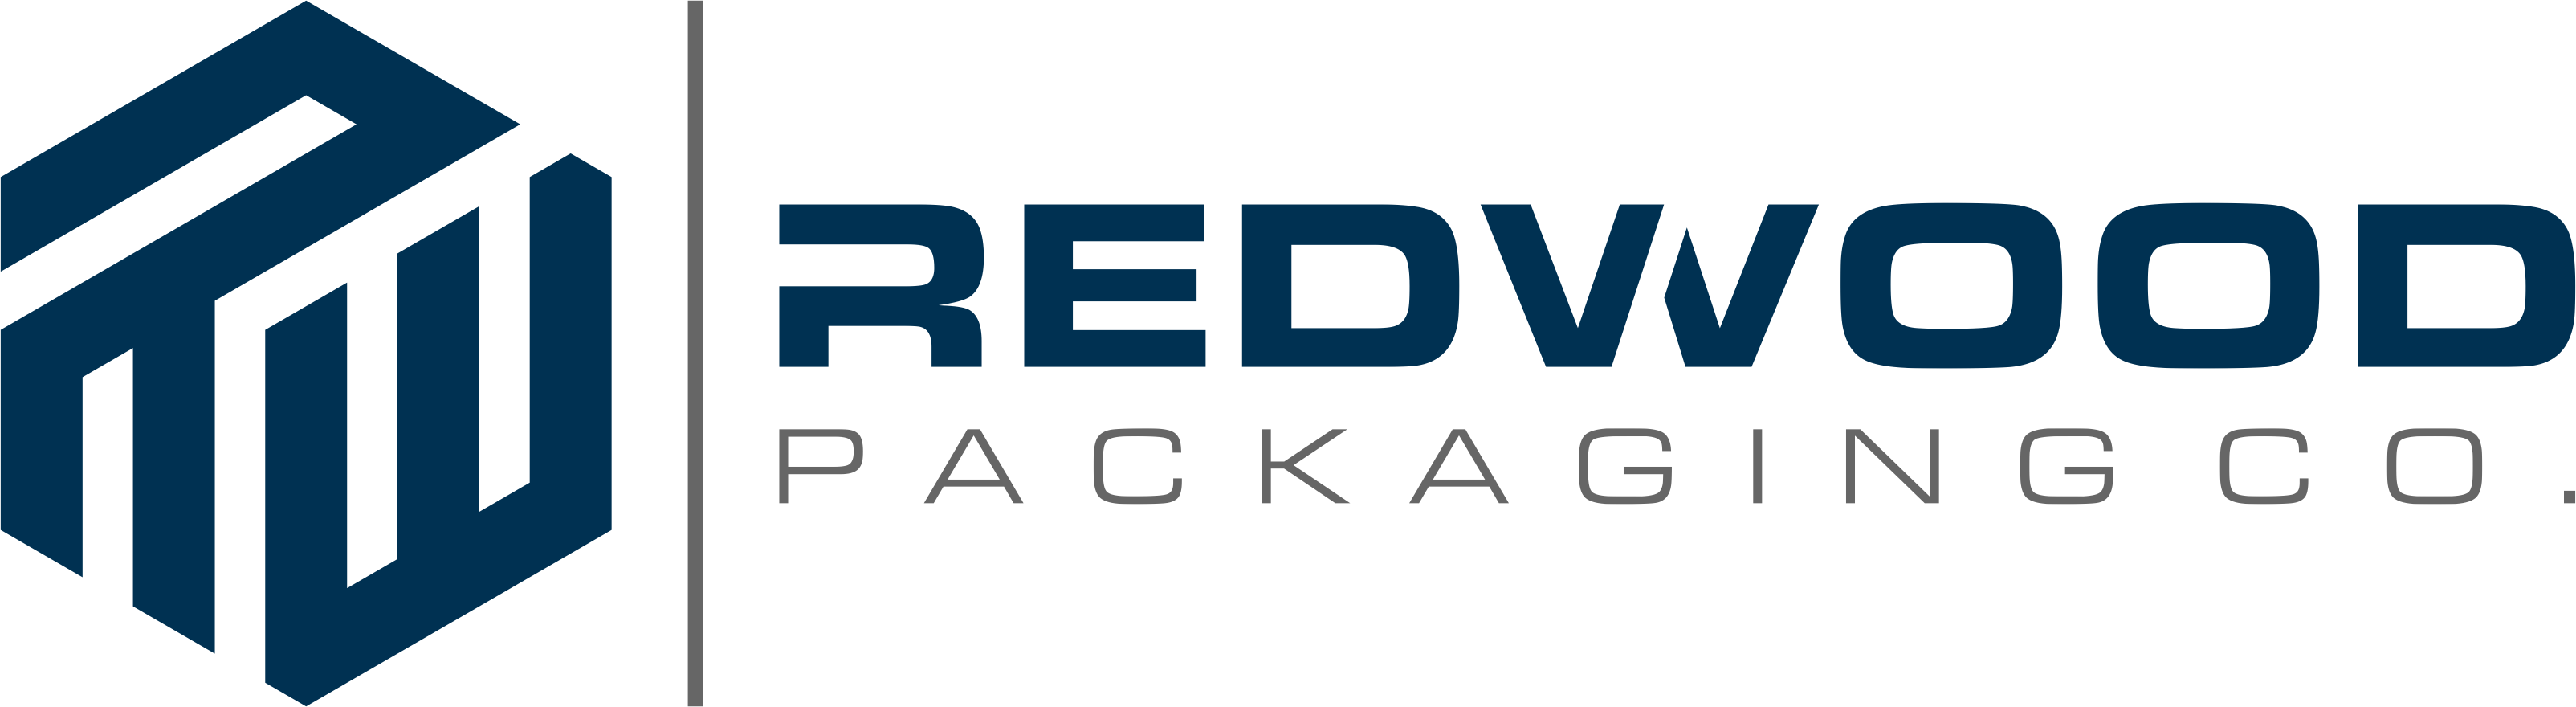 Redwood Packing Company